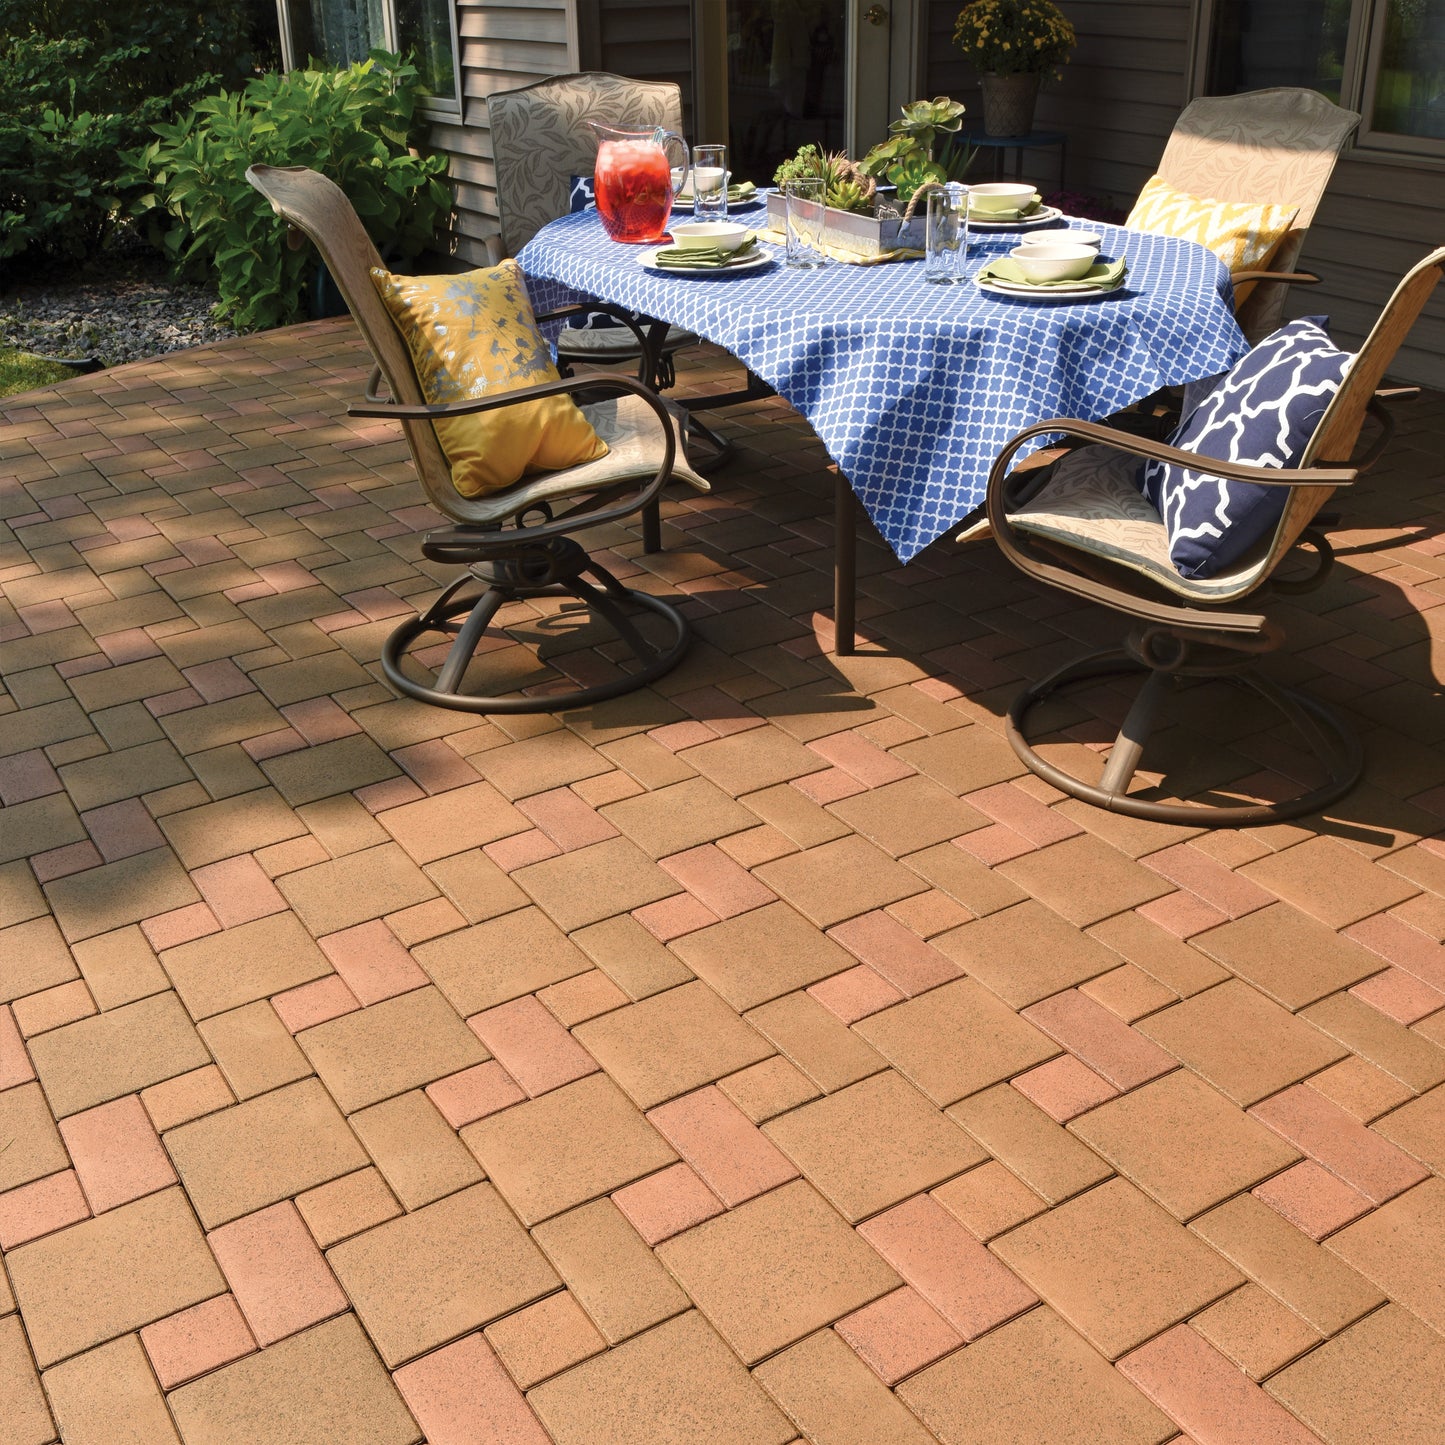 Aspire Pavers with Grid (16 - 4" x 4" Pavers on 16" x 16" Grid)